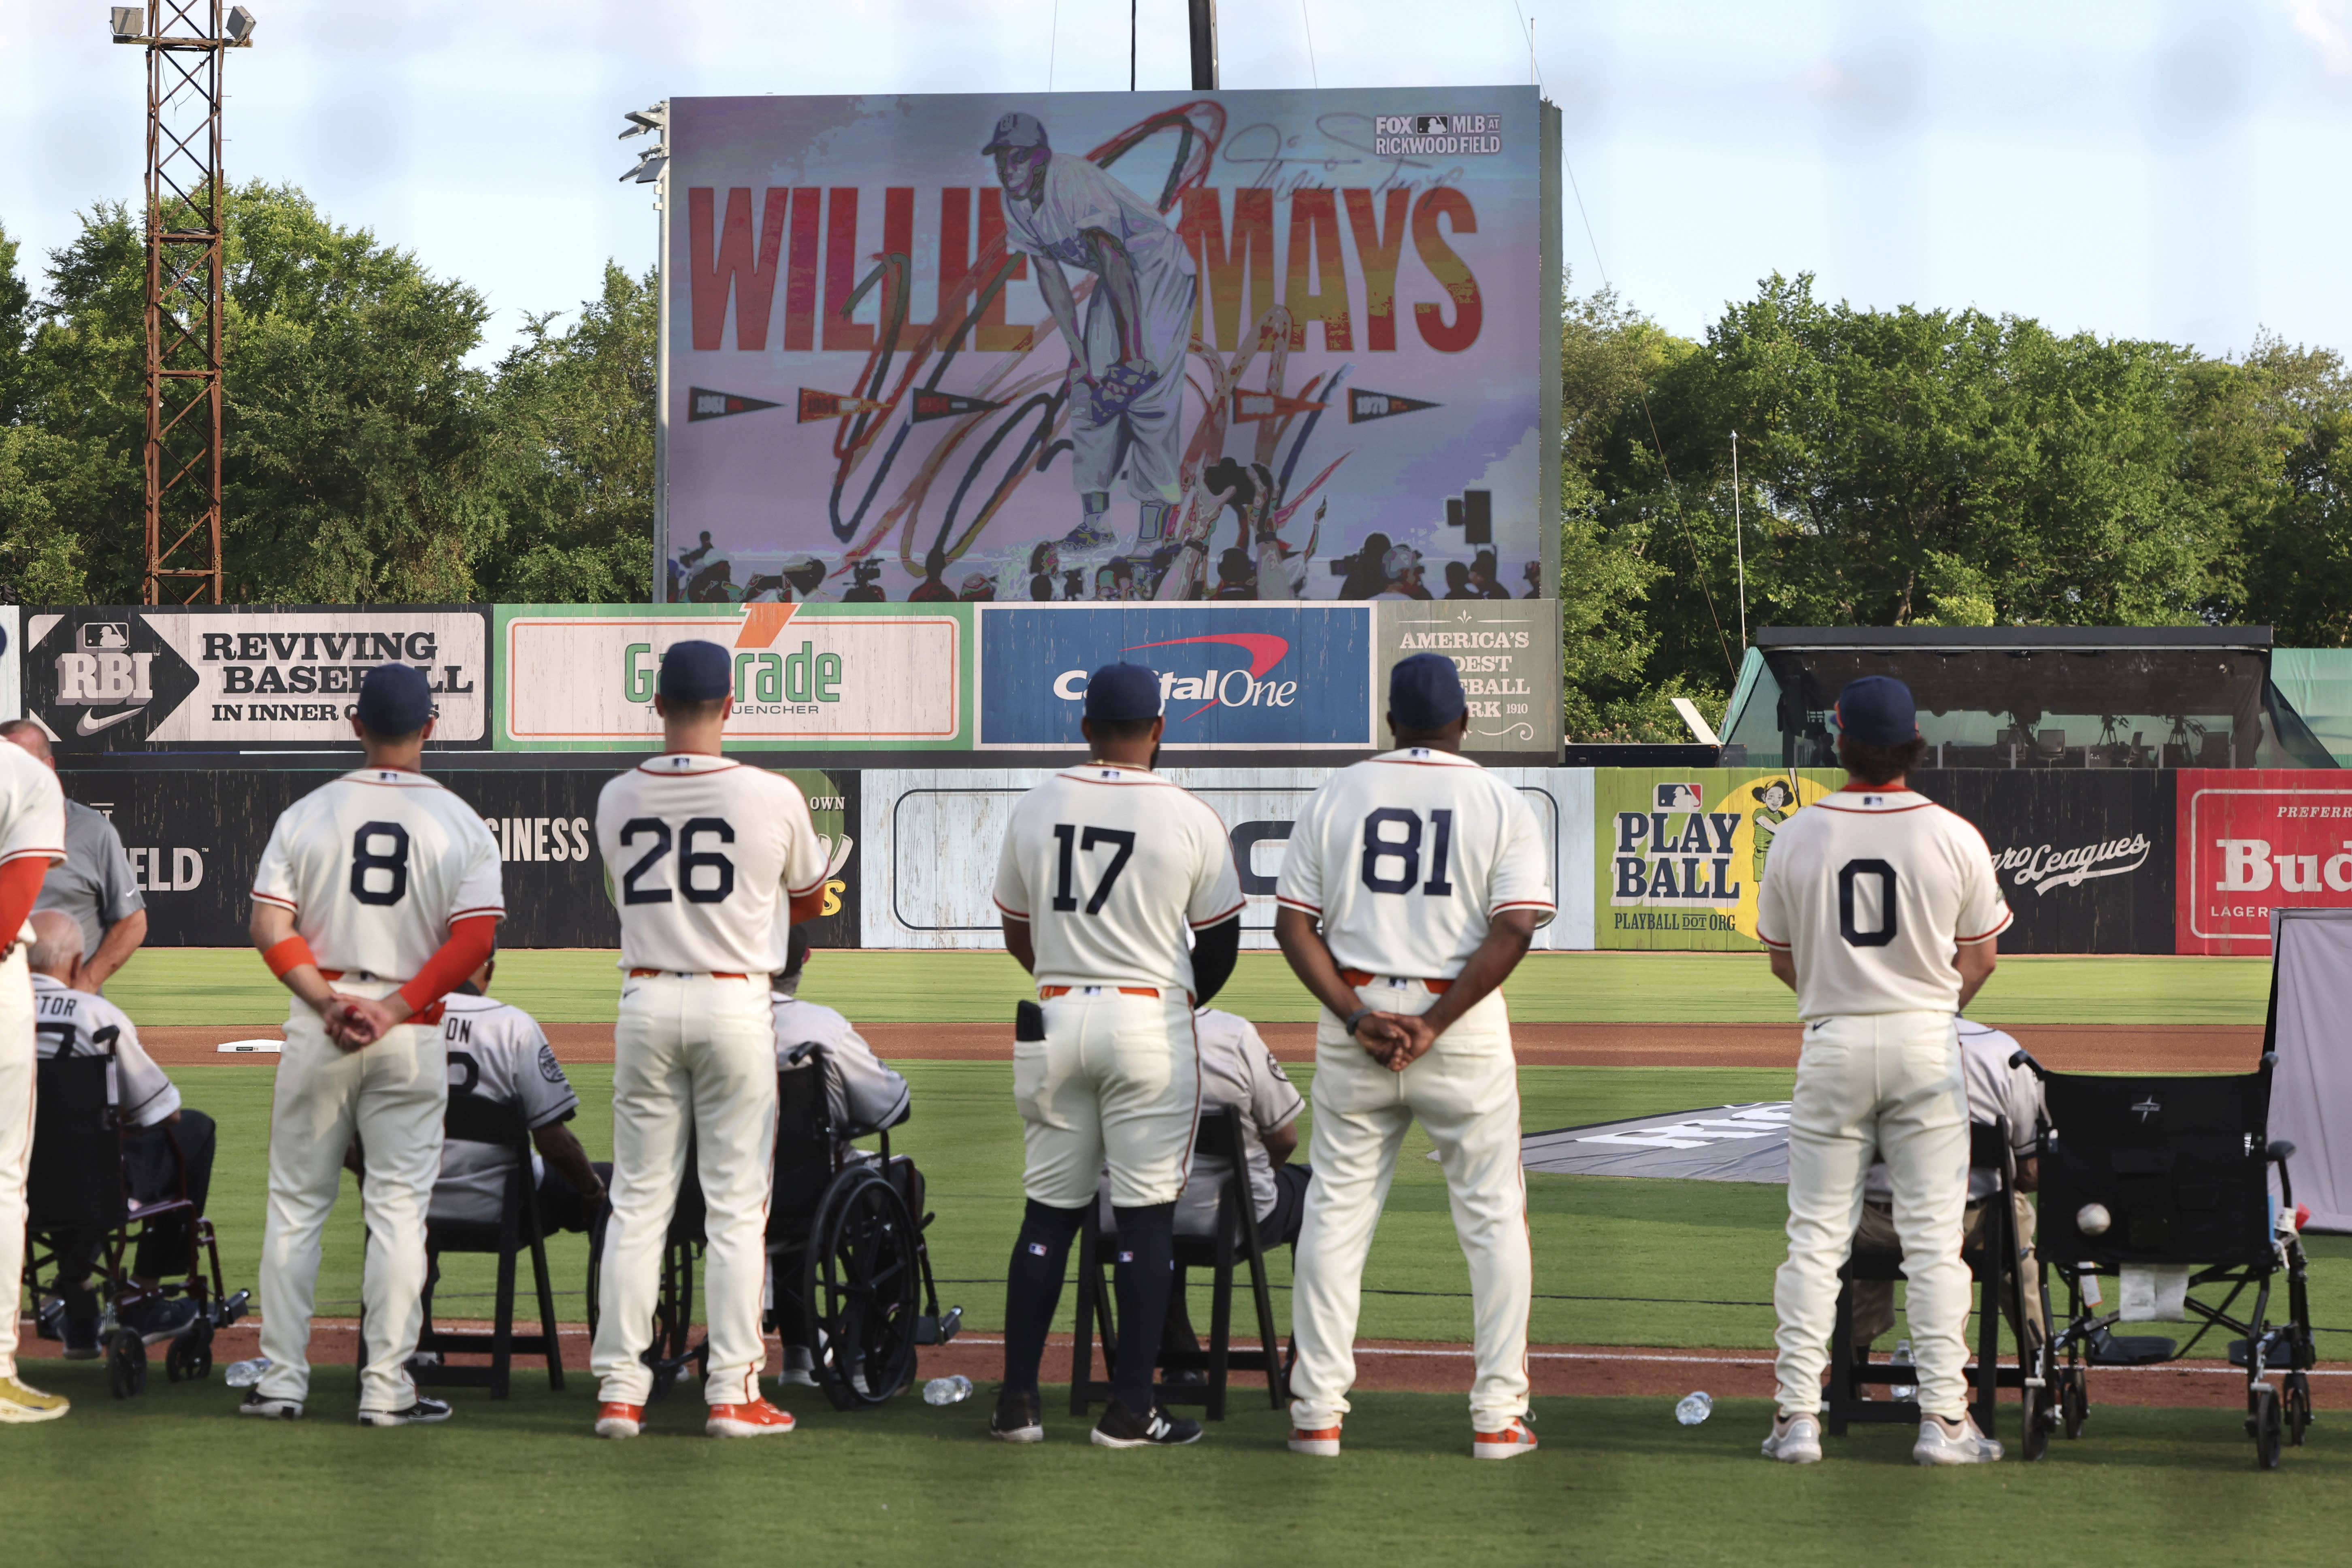 A tribute to Willie Mays before the game at Rickwood Field